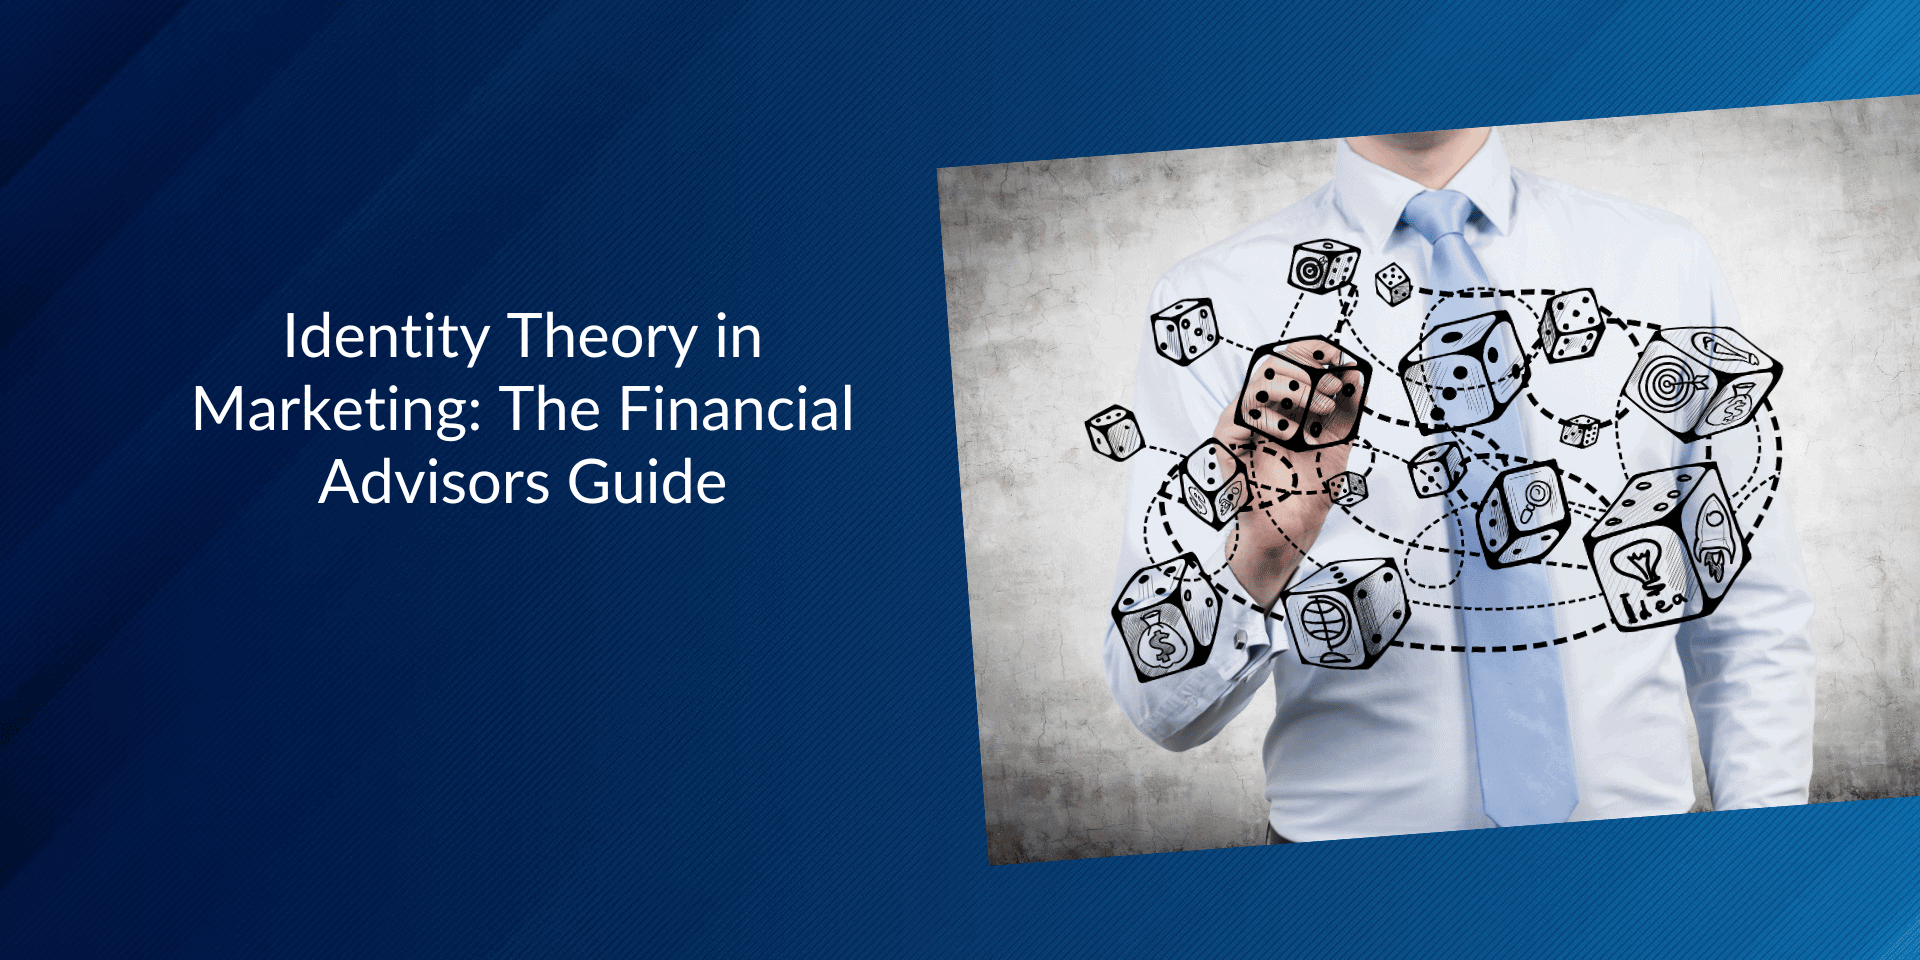 Identity Theory in Marketing: The Financial Advisors Guide